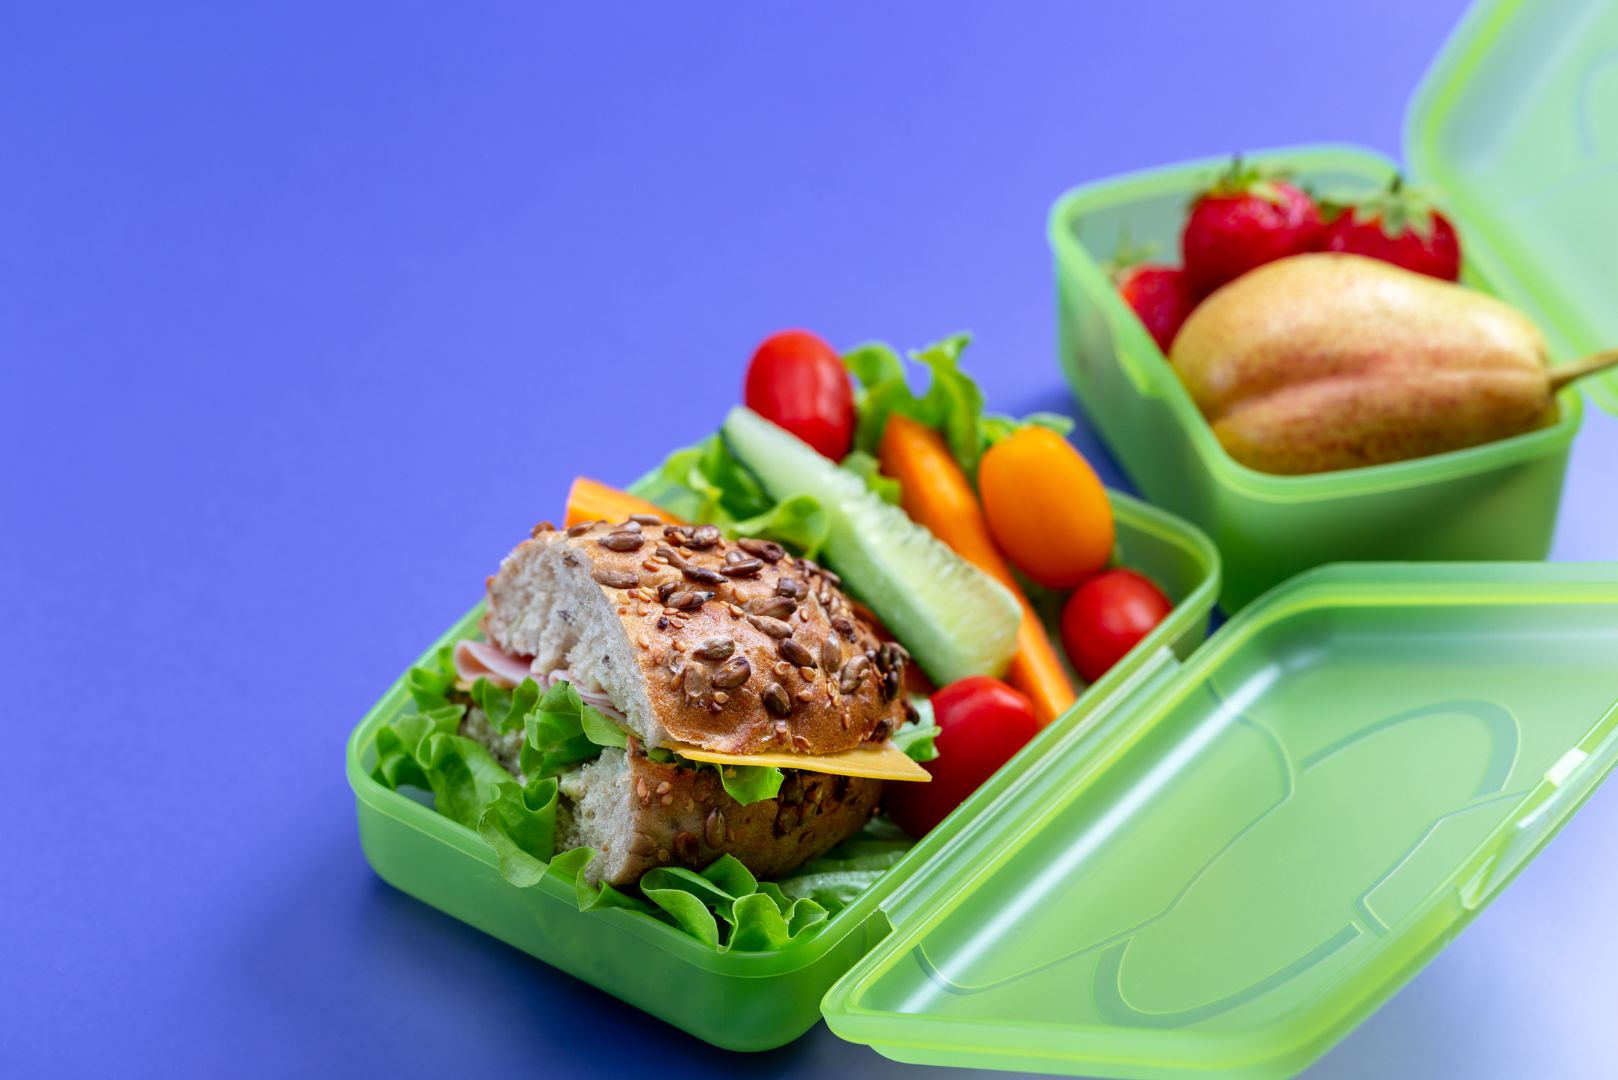 The Best Healthy Snacks for School - The Healhty Blog